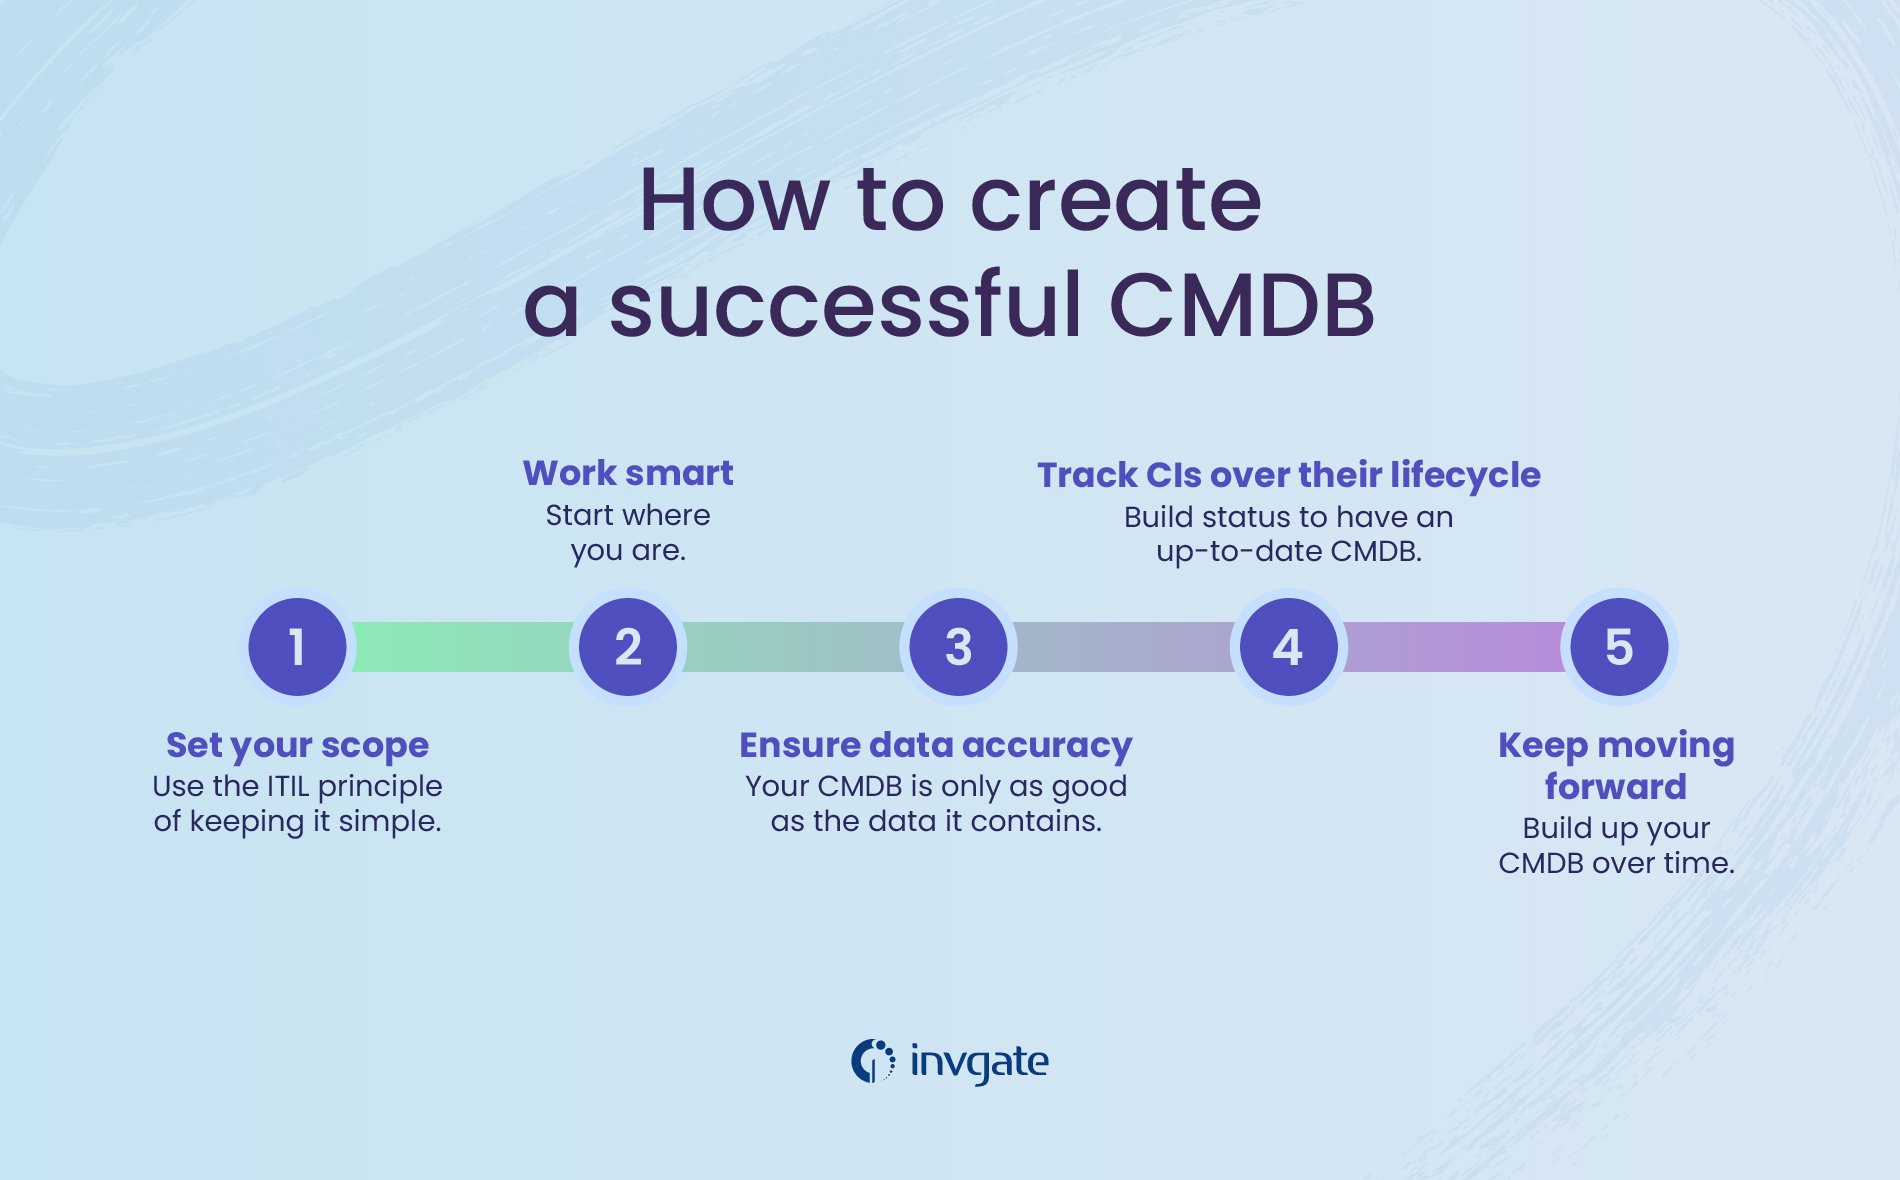 Follow these CMDB best practices for a successful CMDB implementation.